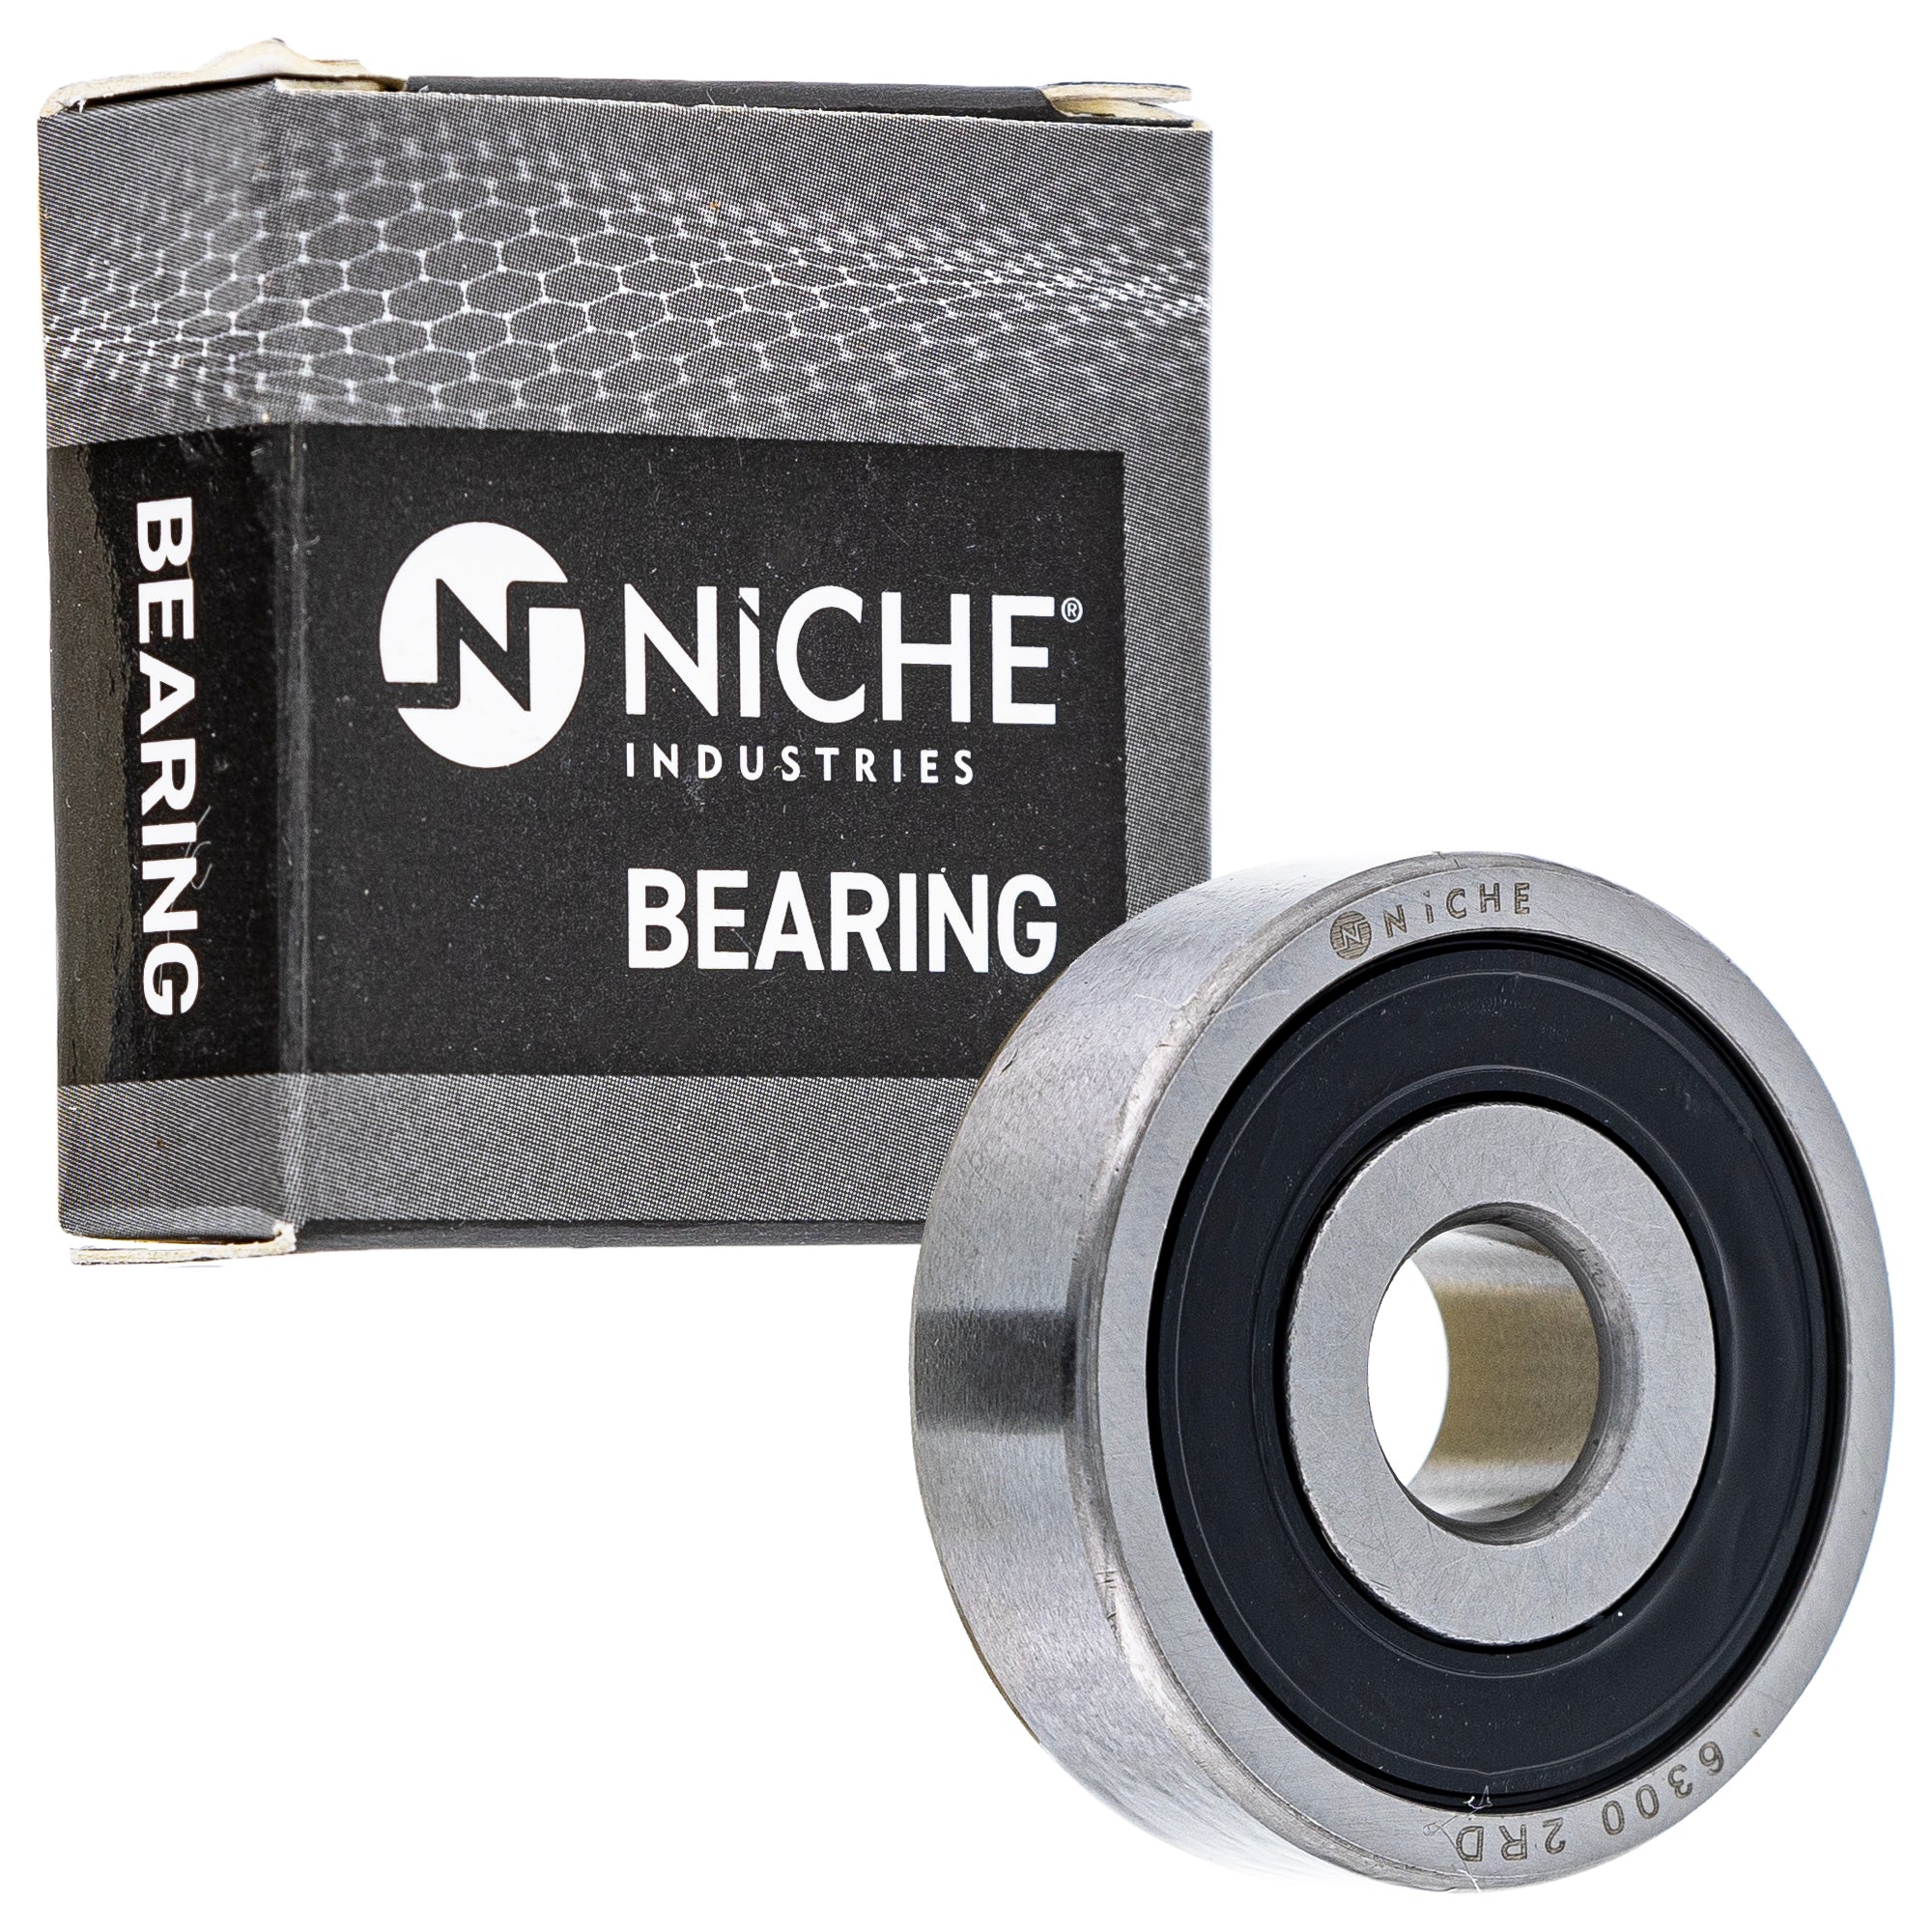 NICHE 519-CBB2331R Bearing for zOTHER RD60